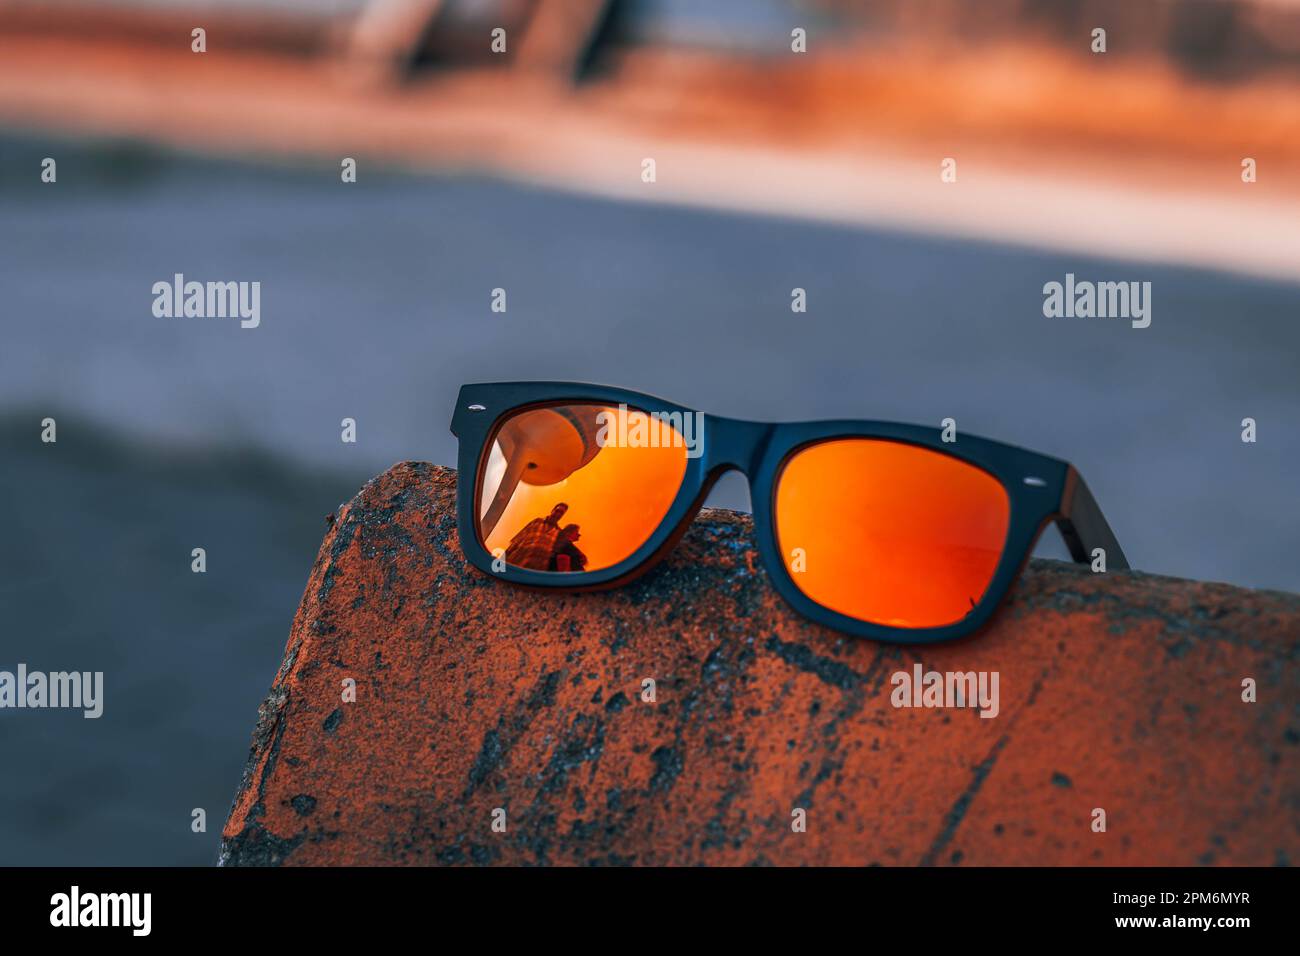 Sunglases with reflection Stock Photo